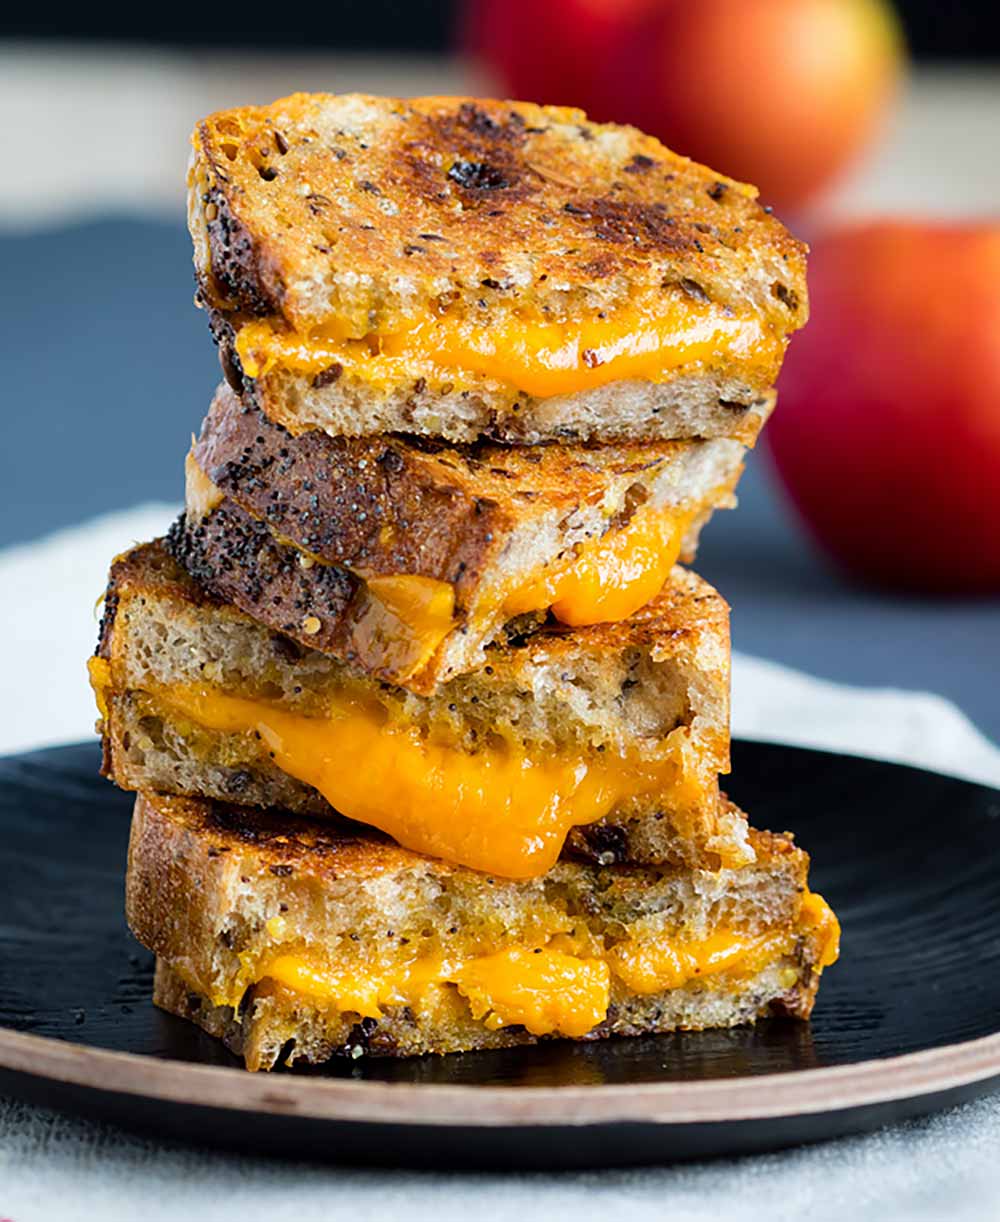 21 Mind-Blowing Grilled Cheese Sandwich Recipes: Raisin Bread Grilled Cheese